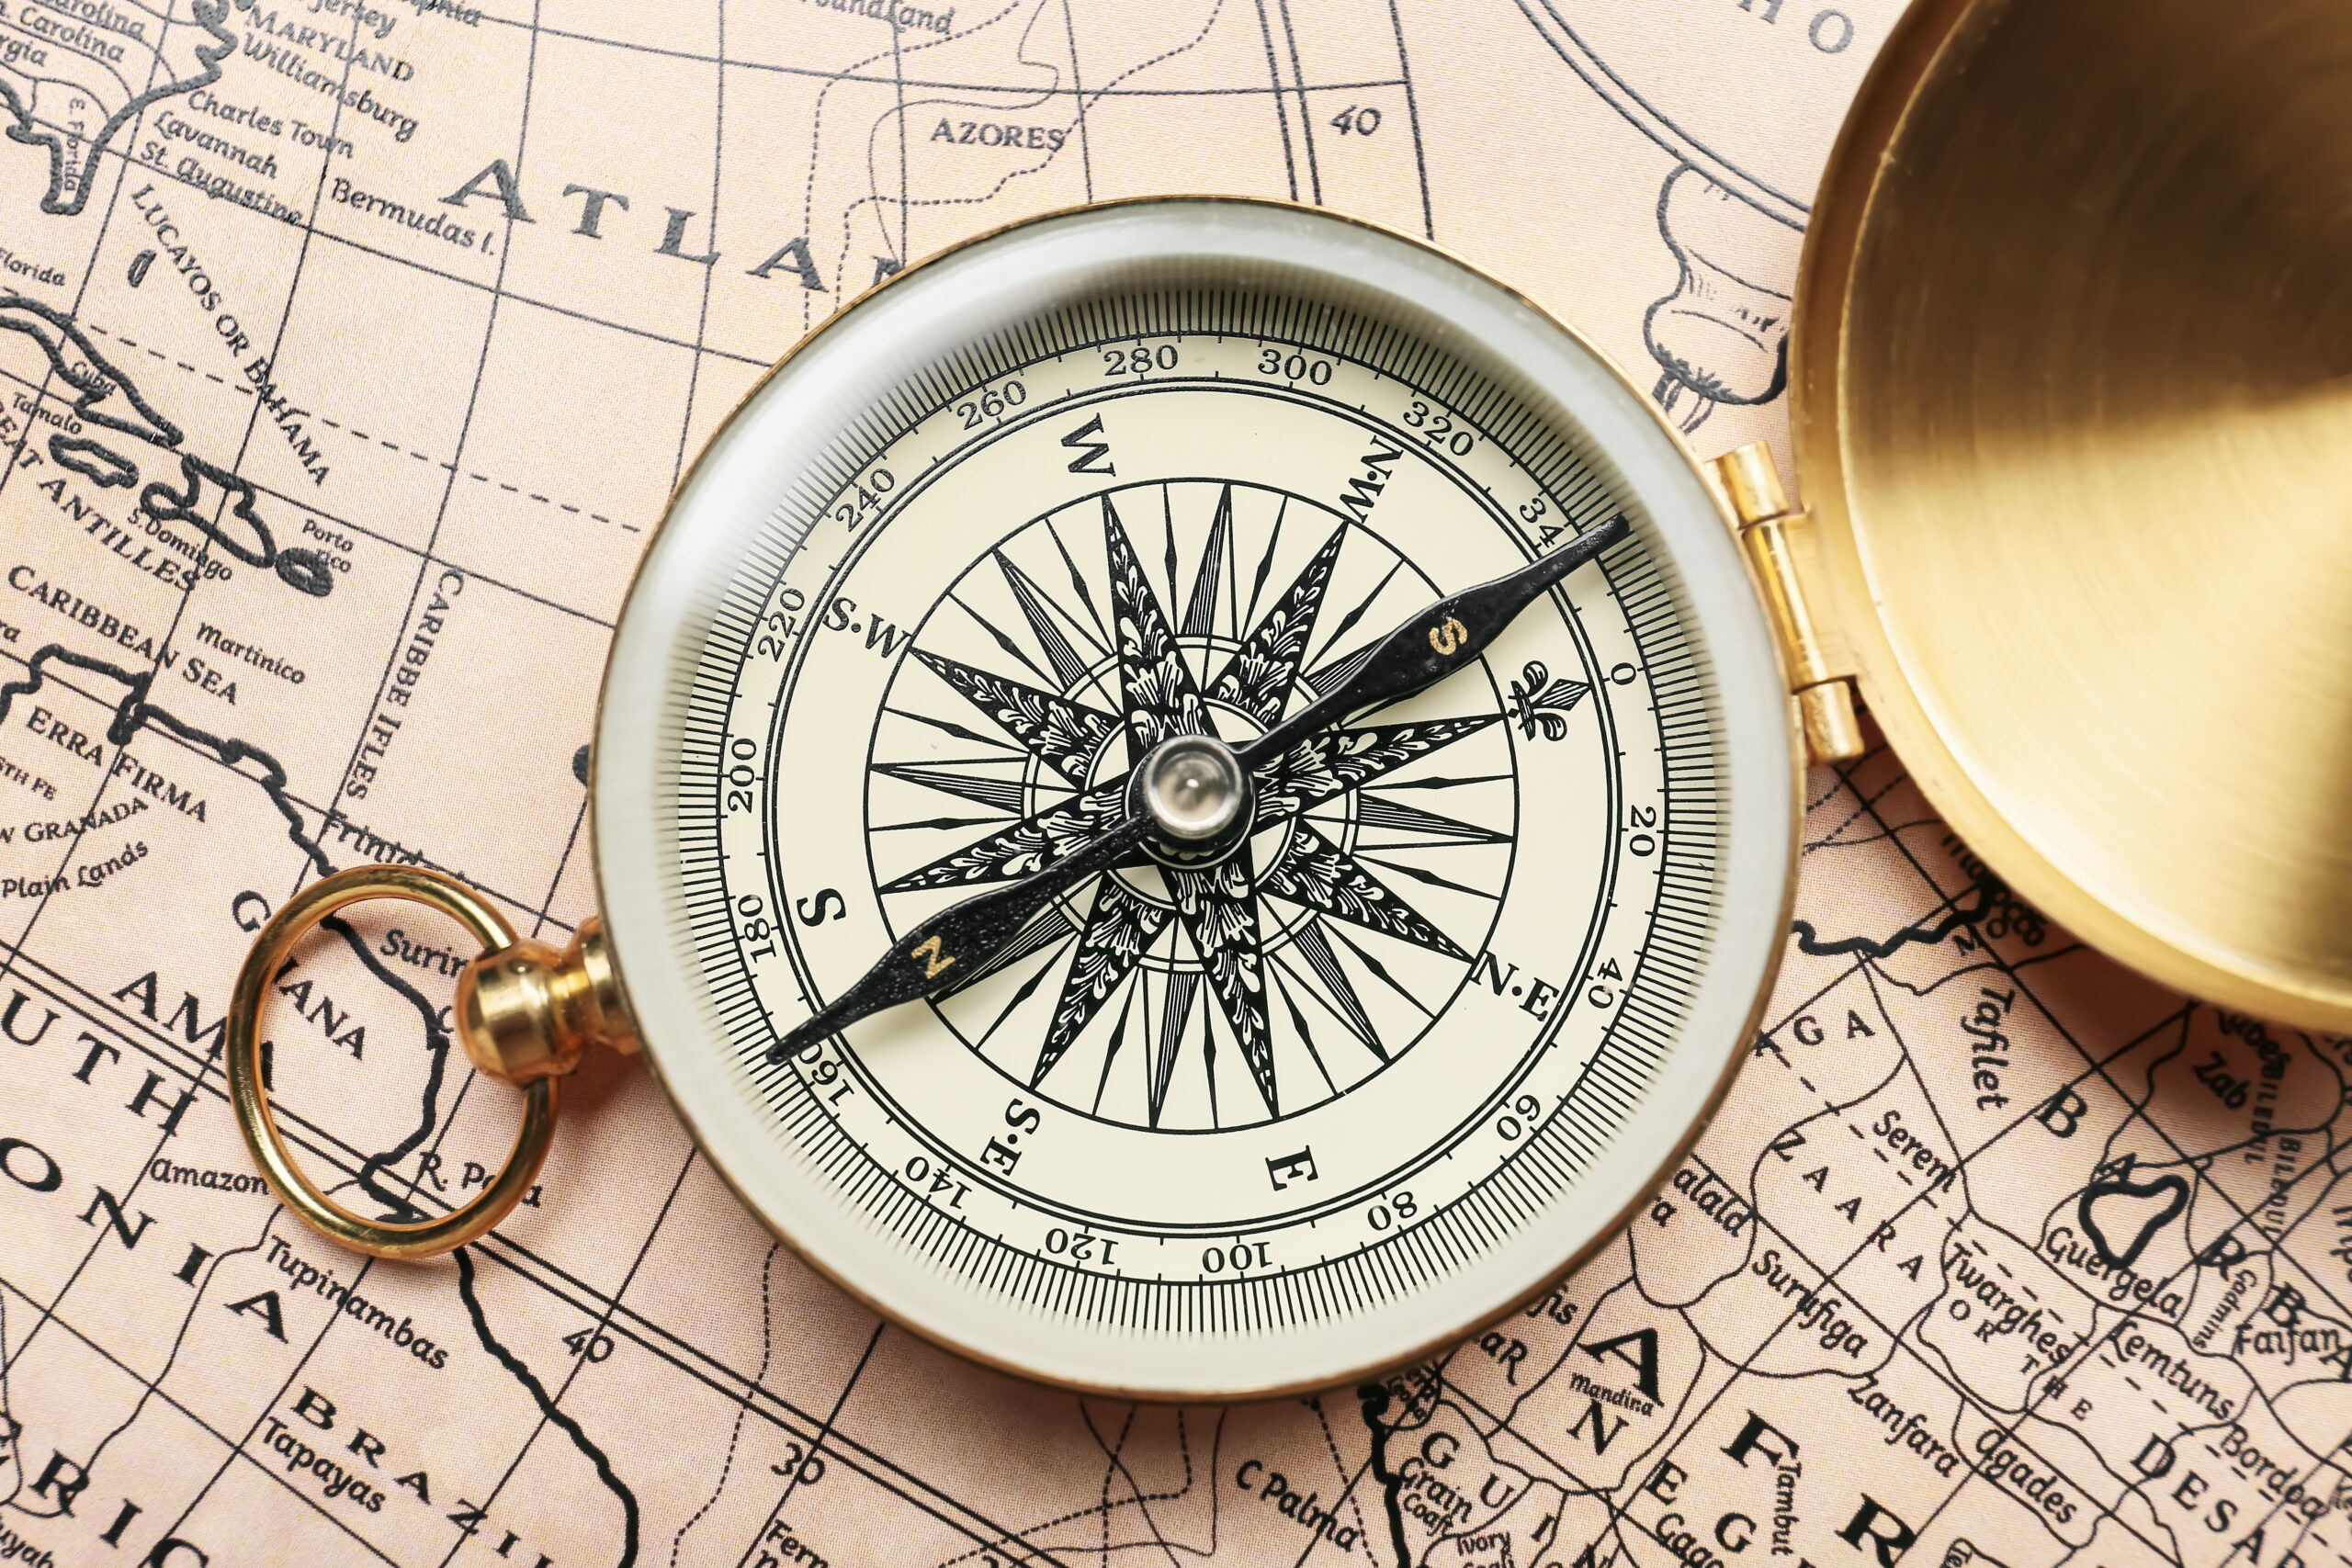 Dorlon Rep Purpose - Old compass on a vintage world map pointing to the goal